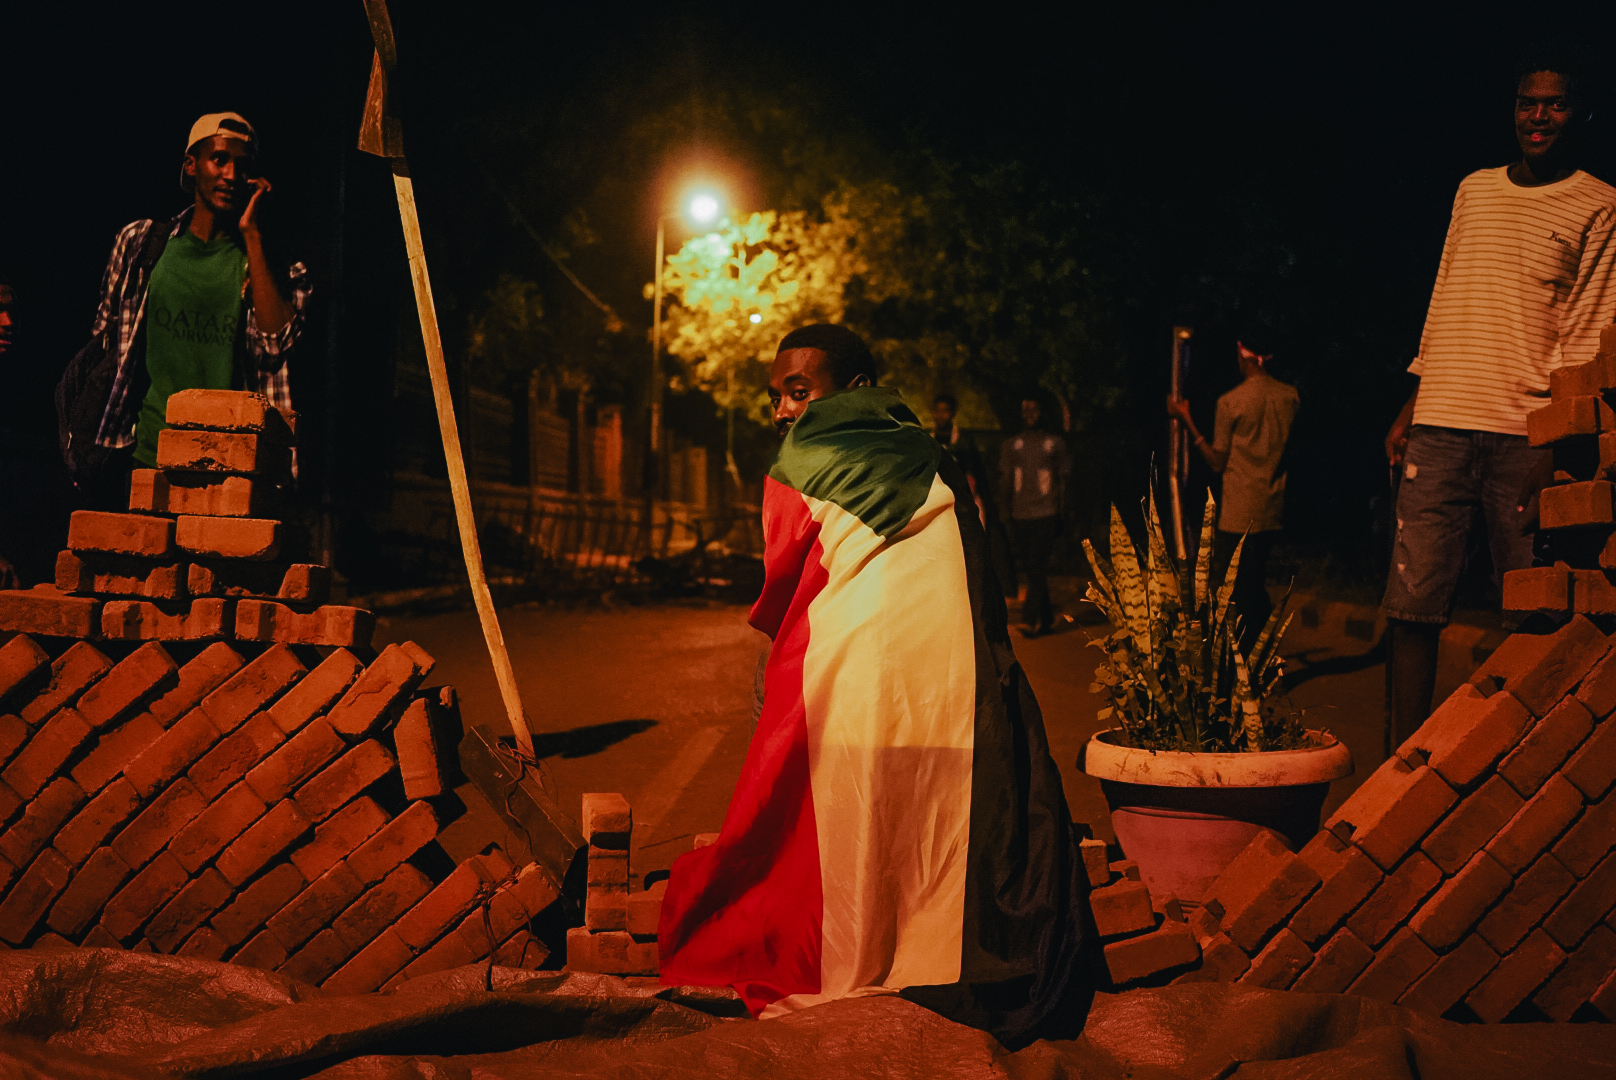 Sudanese protesters have built barricades in the streets near Colombia (MEE/Kaamil Ahmed)